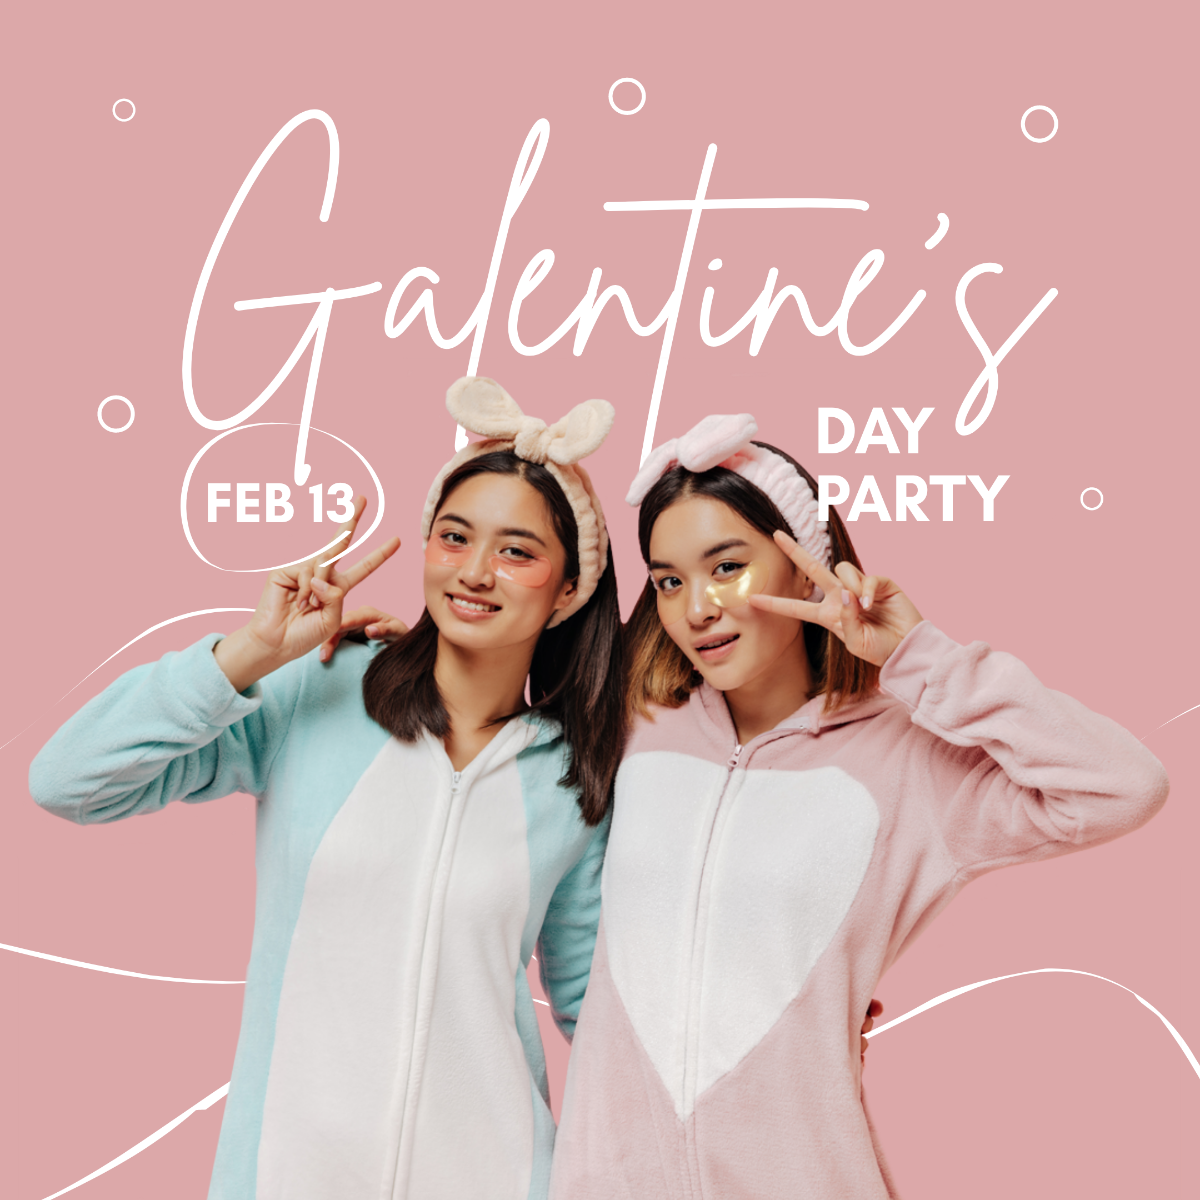 Free Galentines Day Party Instagram Post Template